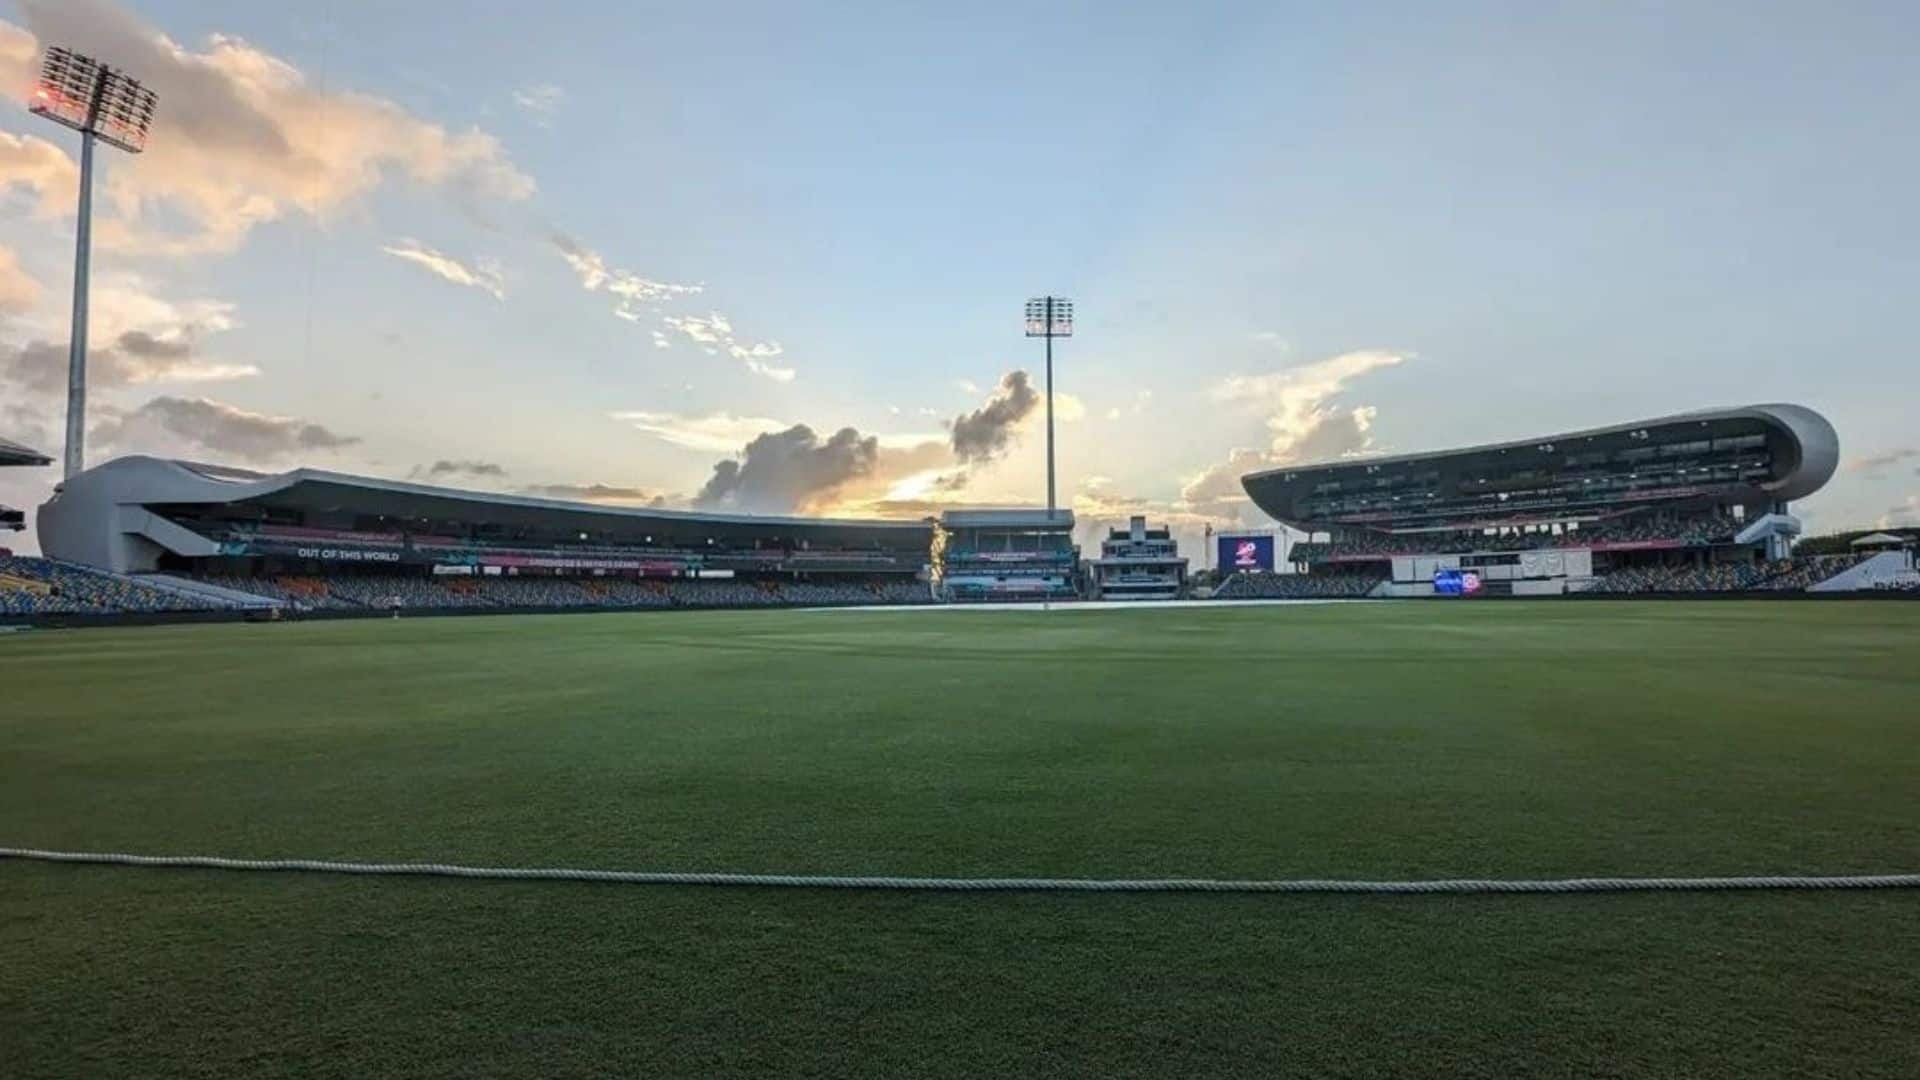 Kensington Oval Barbados Pitch Report For NAM vs OMN T20 World Cup Match